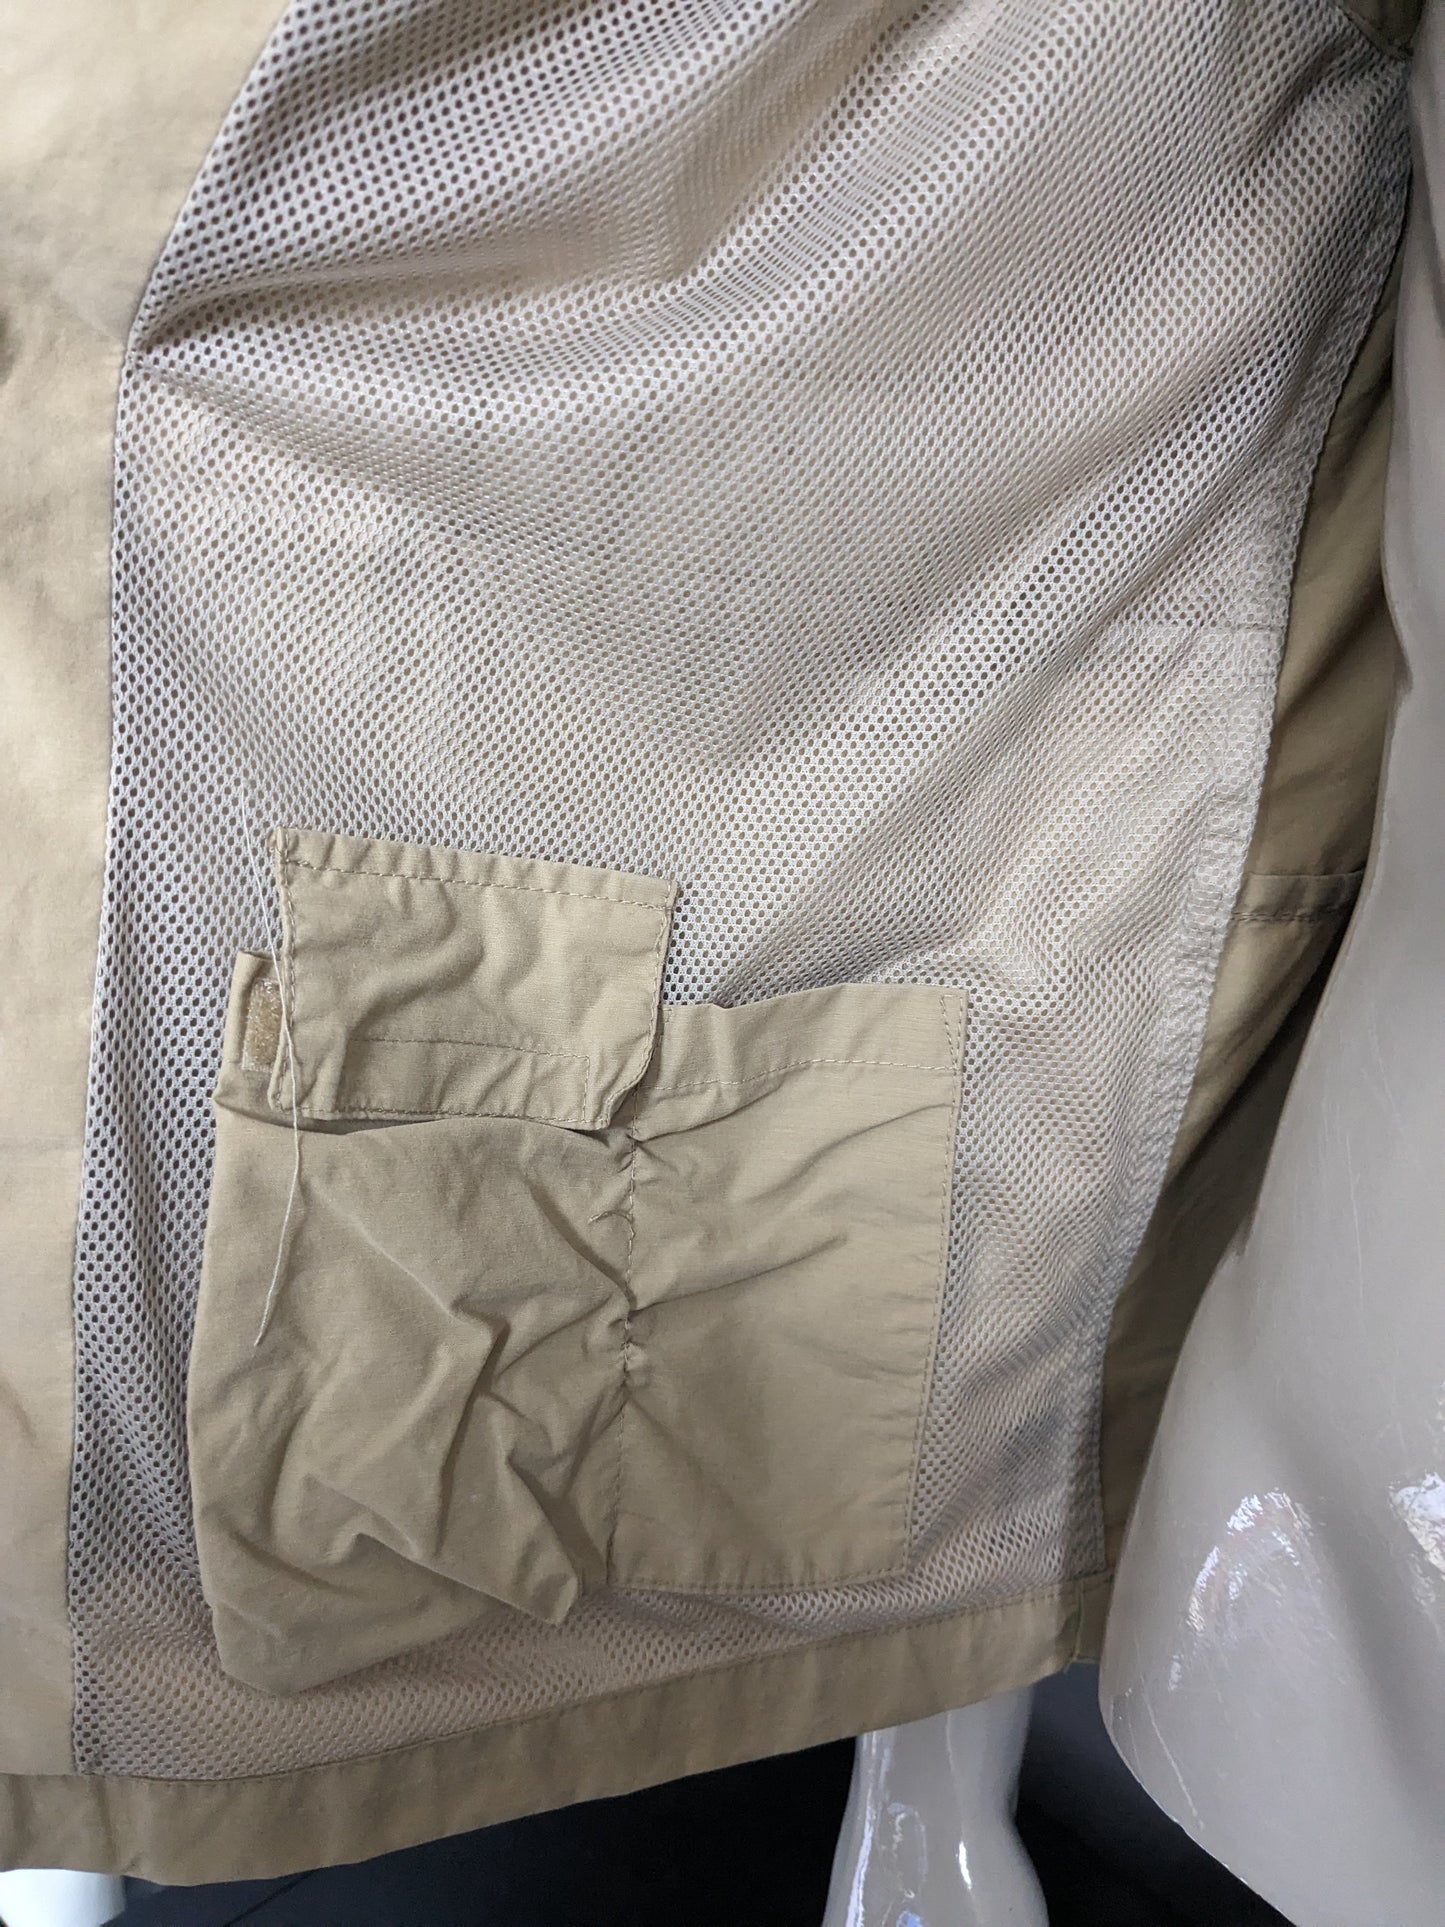 Camel Active Dunne Body Warmer. Beige colored. Size M.